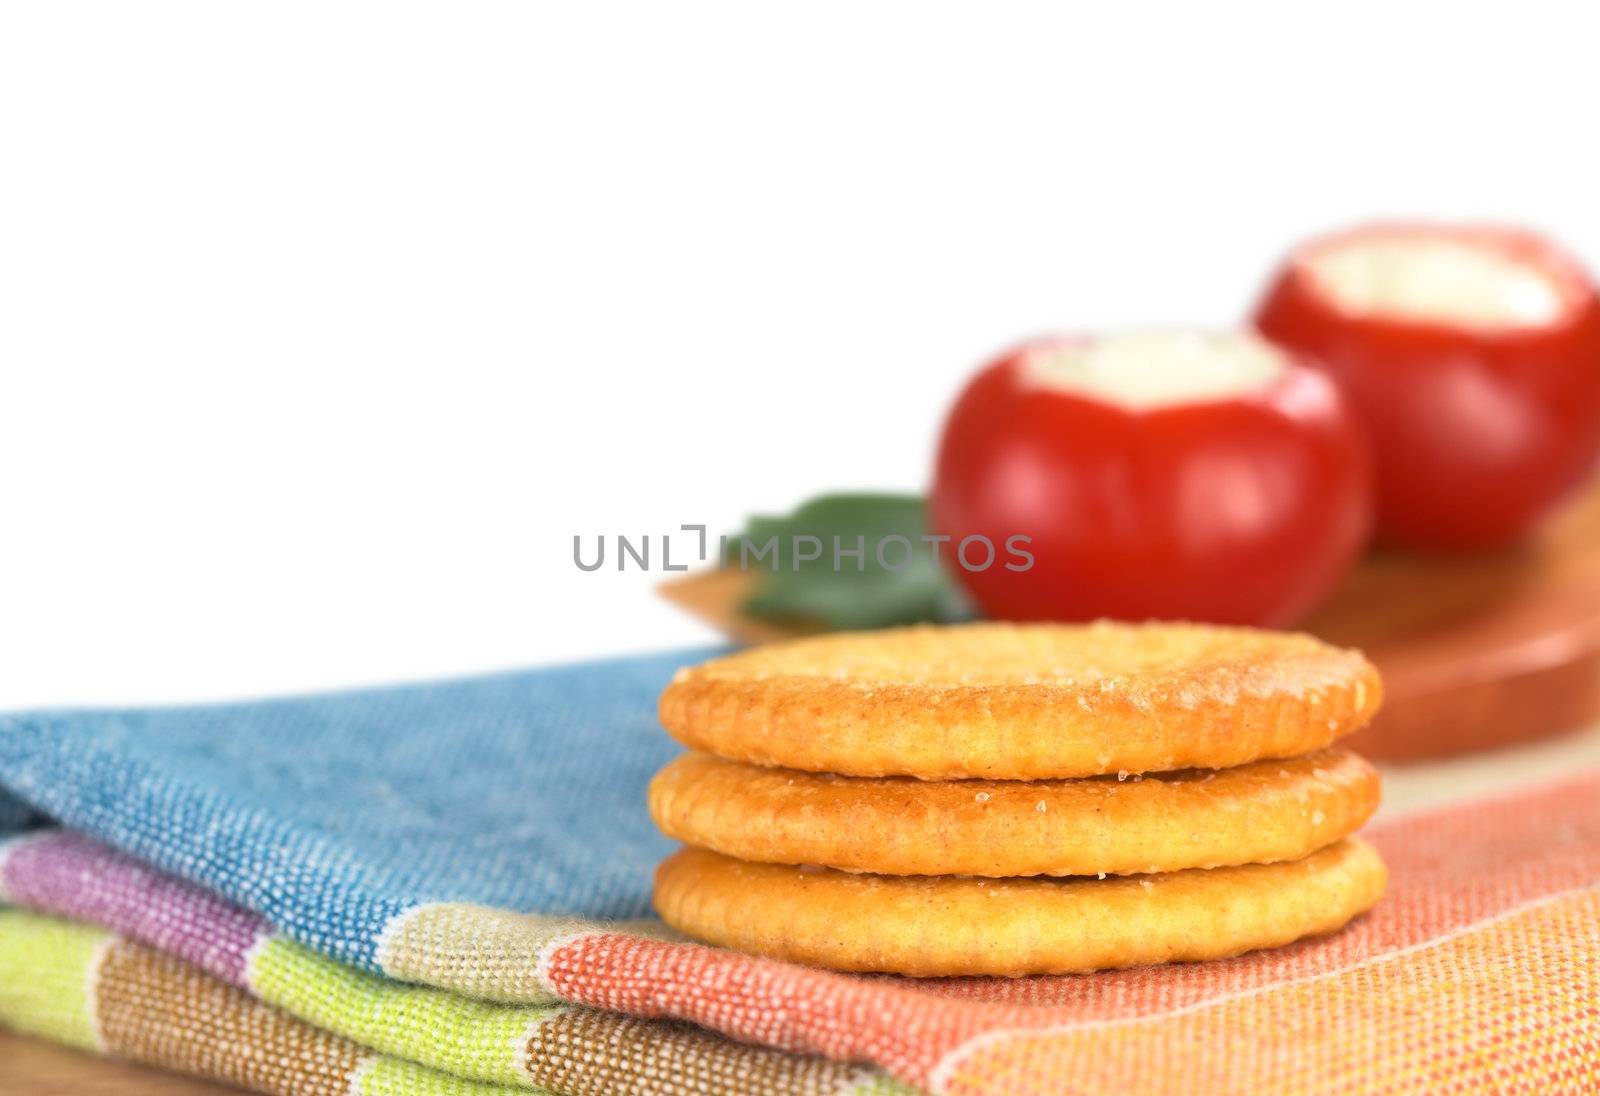 A pile of salty crackers on textile with round red pepper in the back (Very Shallow Depth of Field, Focus on the front of the crackers)